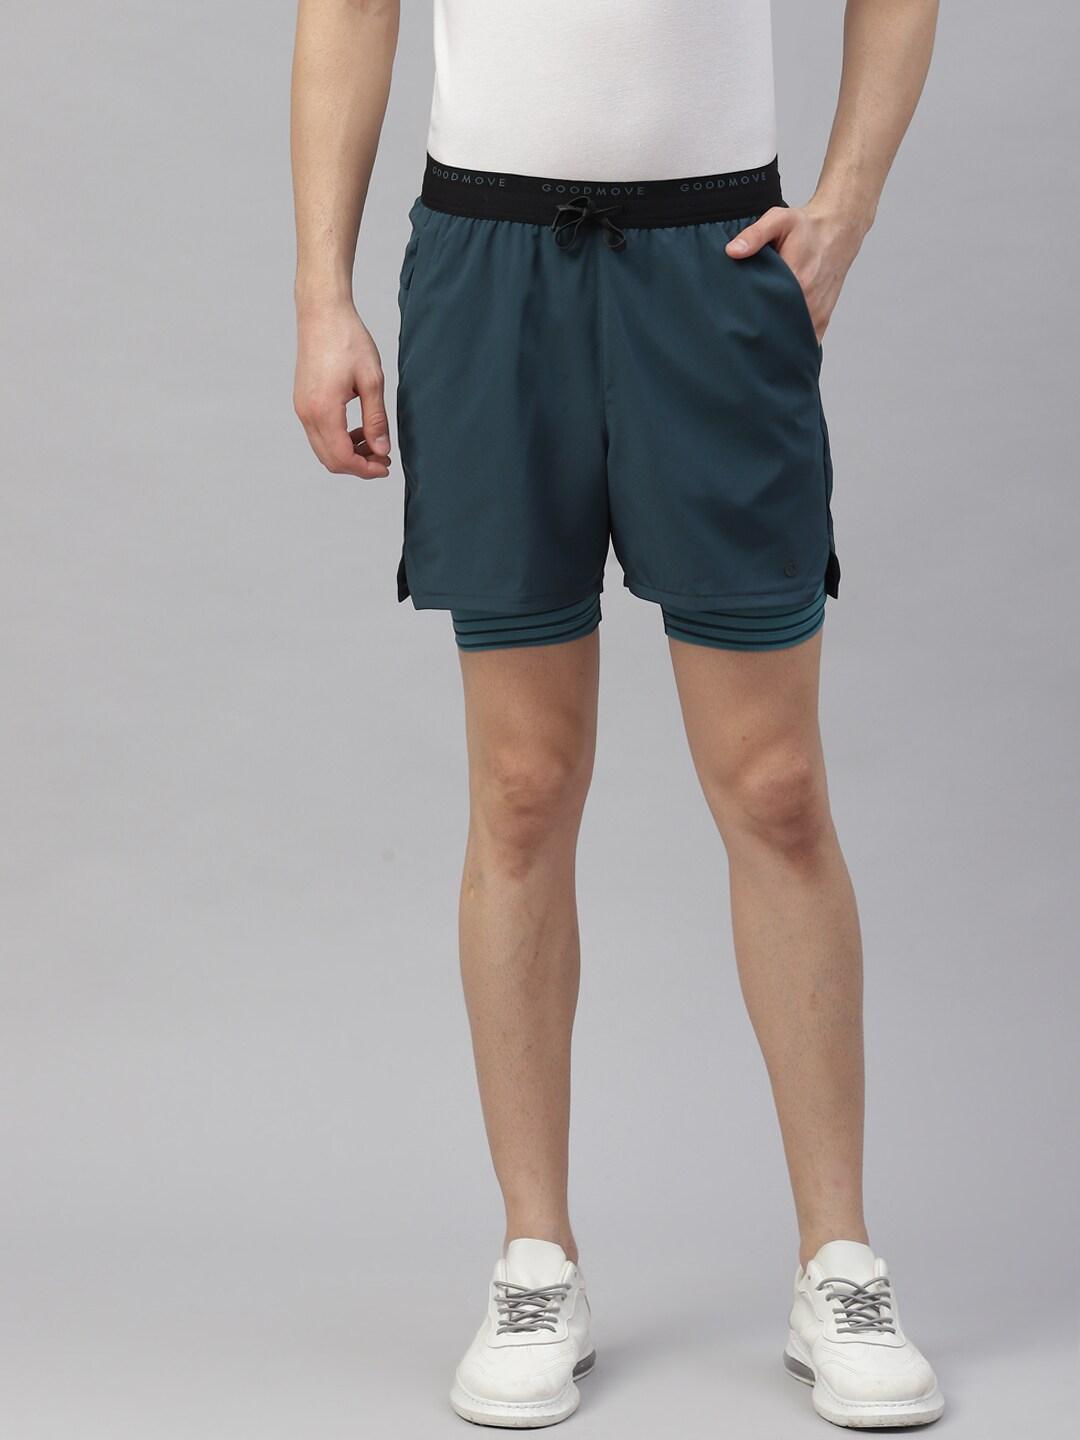 marks & spencer men teal green solid layered sports shorts